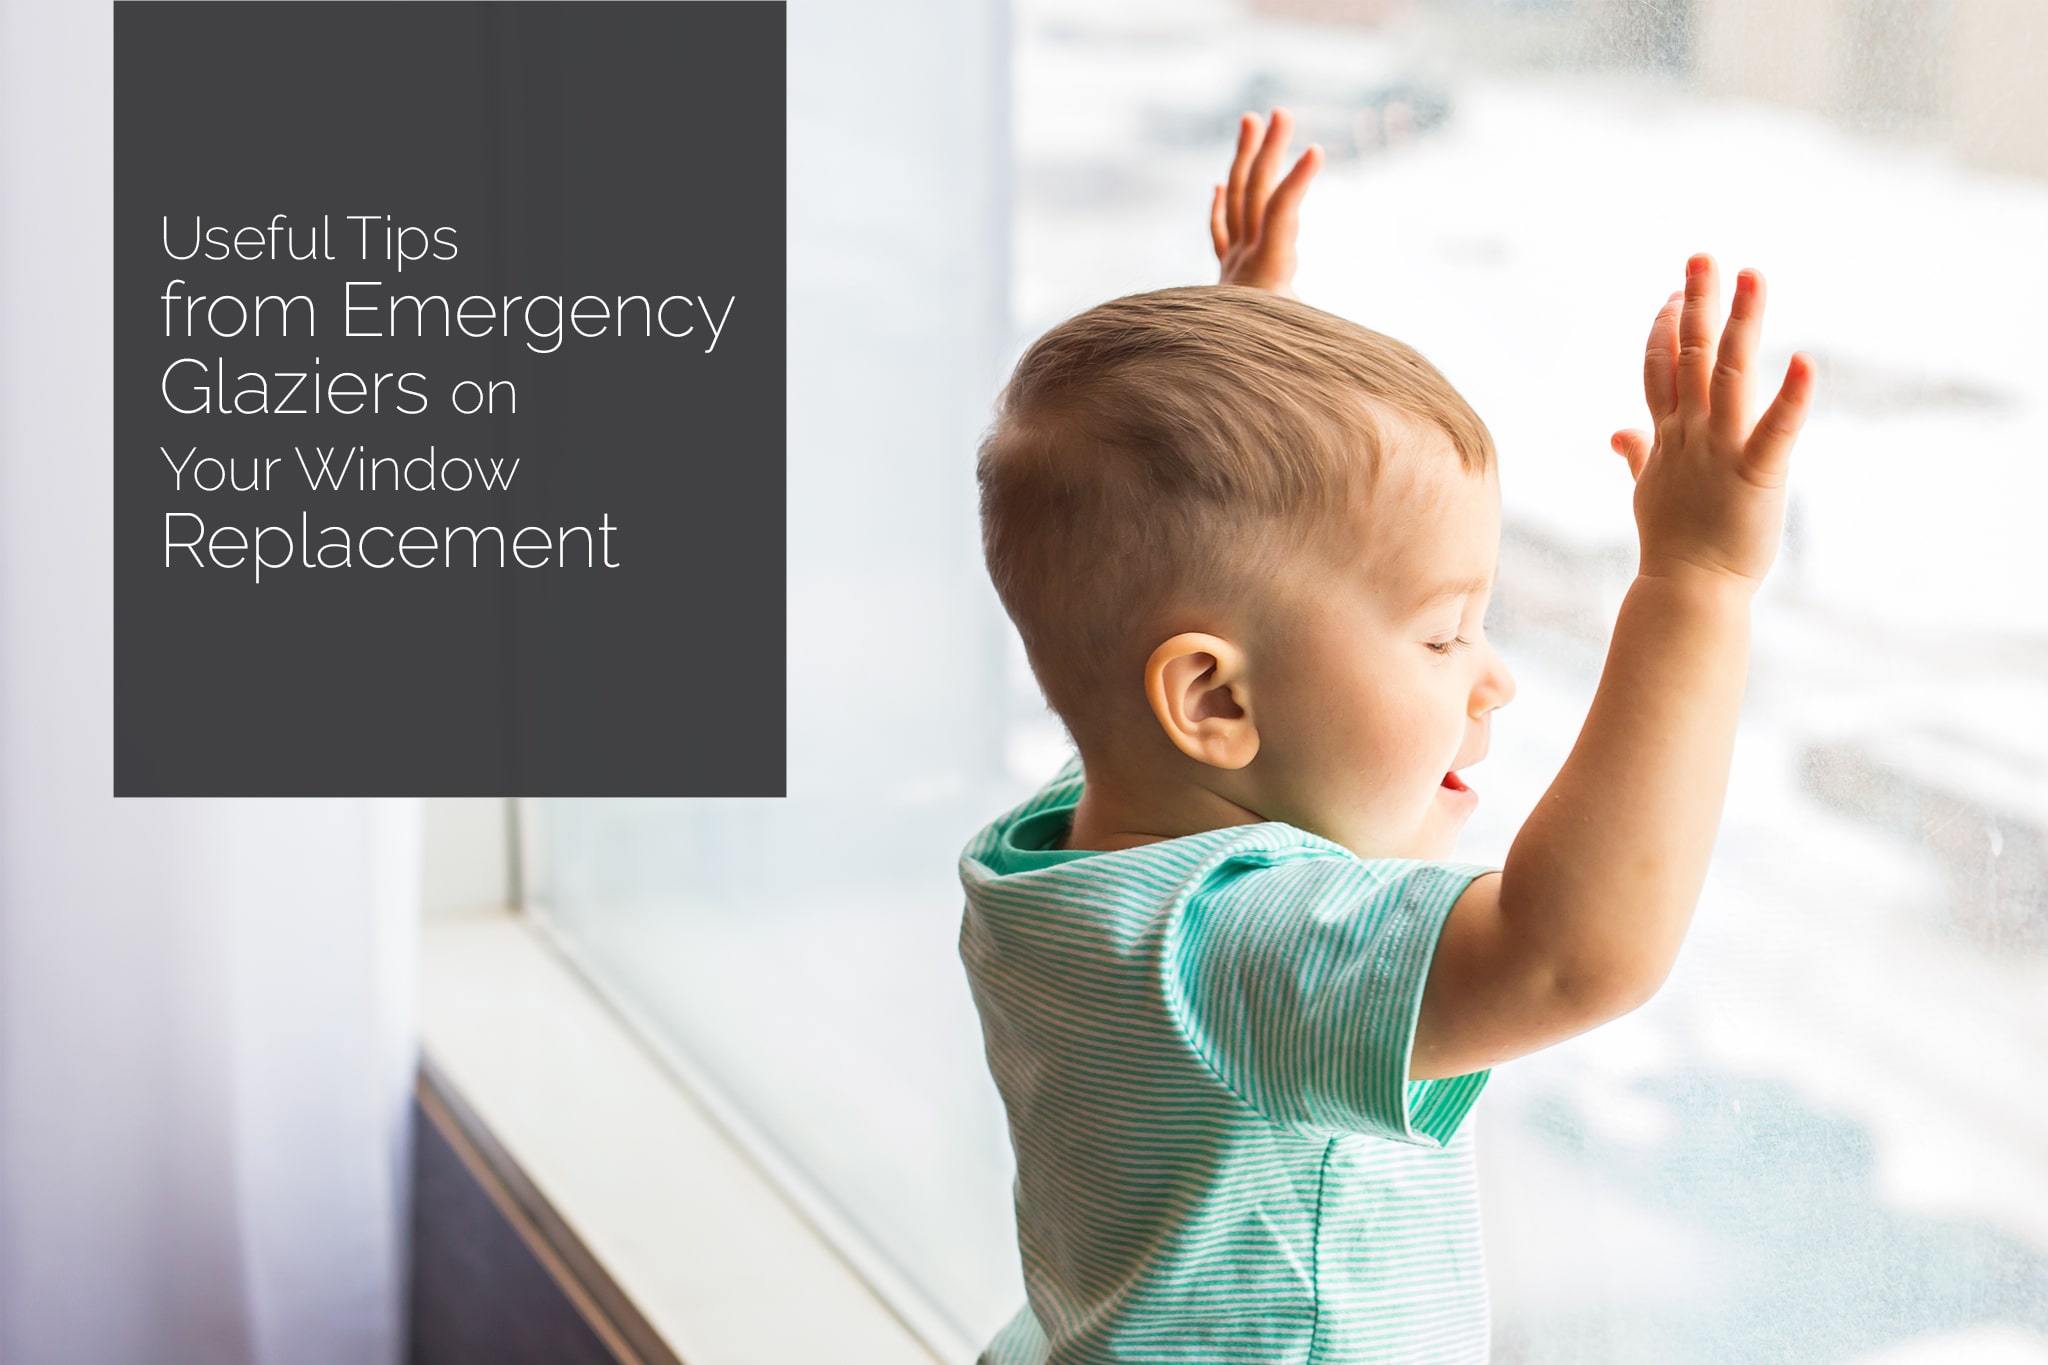 Right Glass Doors and Windows for the Safety of Your Child